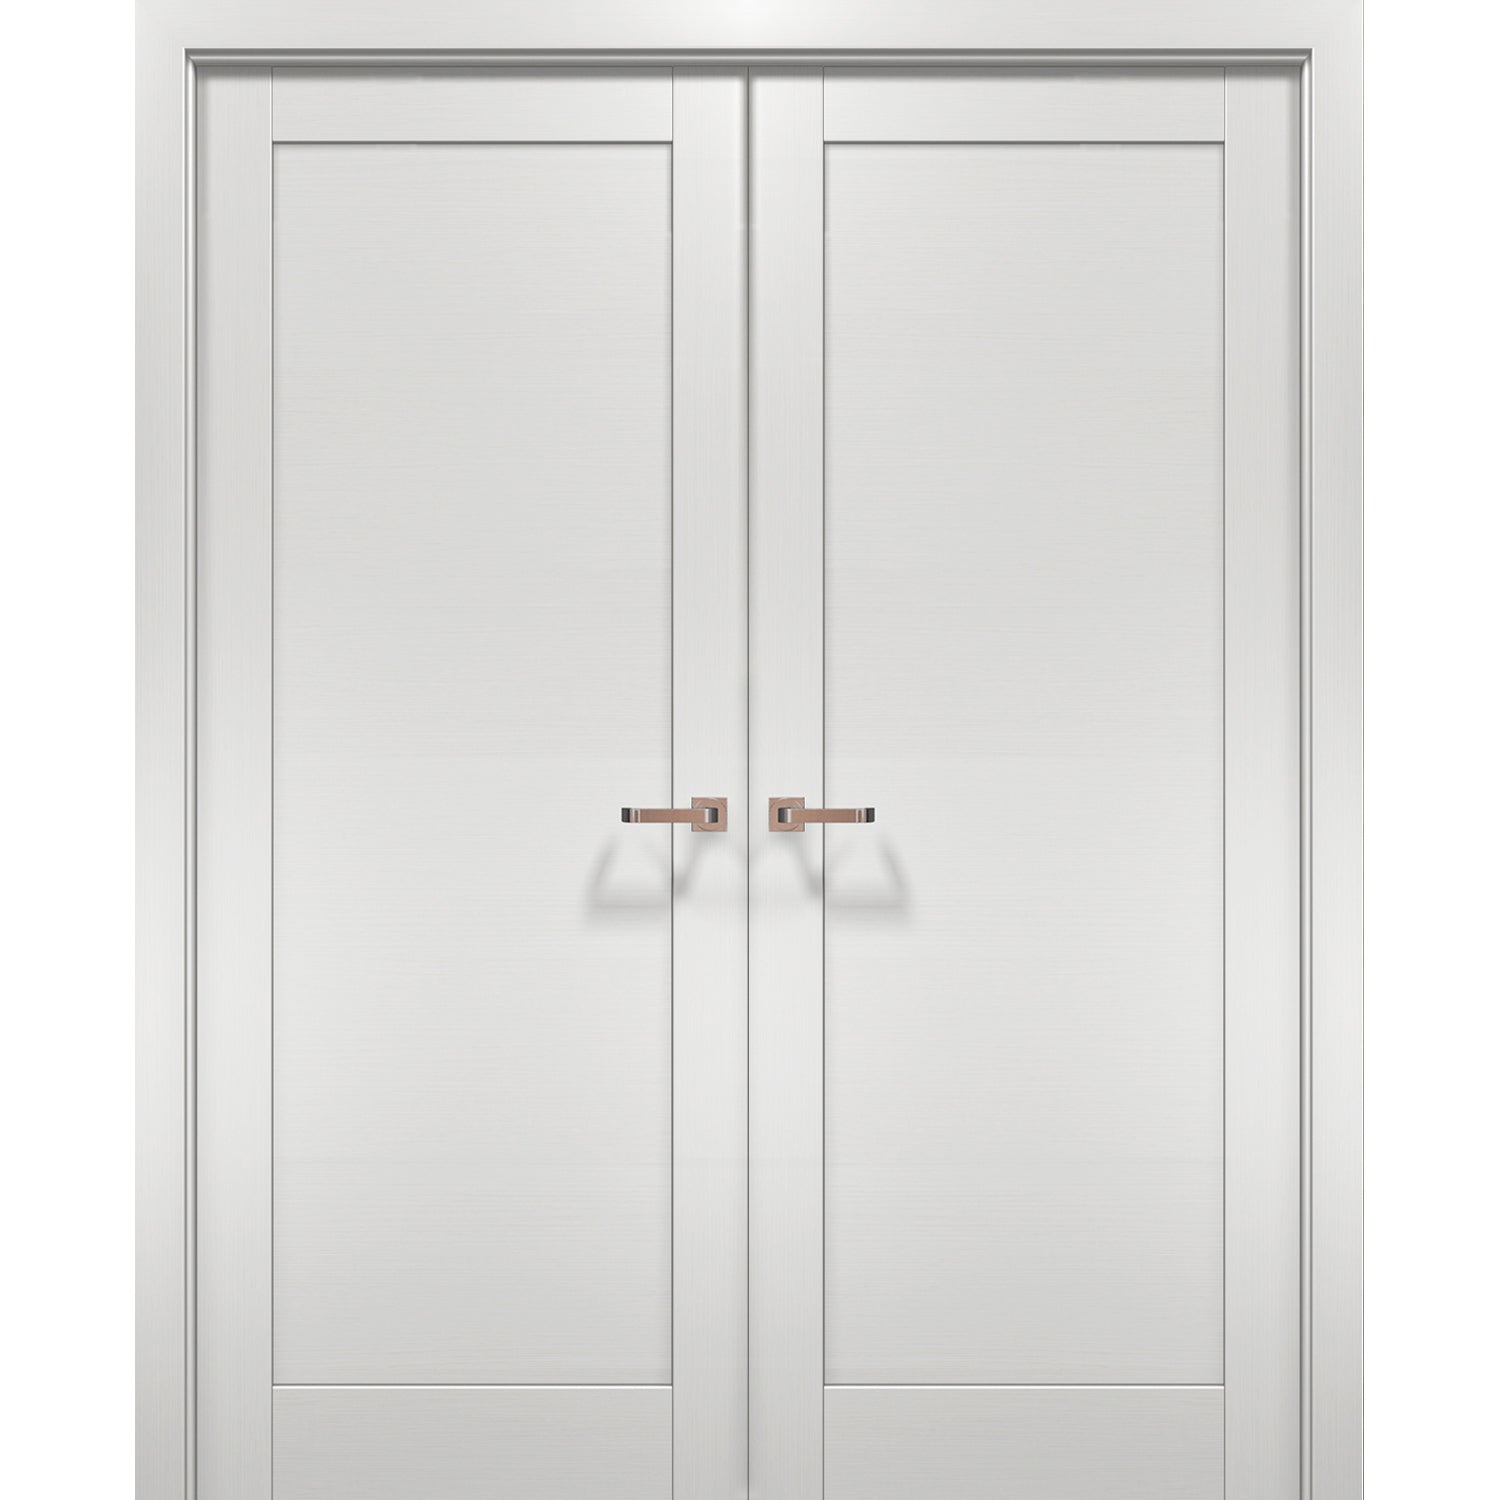 SARTODOORS French Double Doors 84 x 80 with Hardware | Quadro 4111 White Ash | Pre-hung Panel Frame | Door